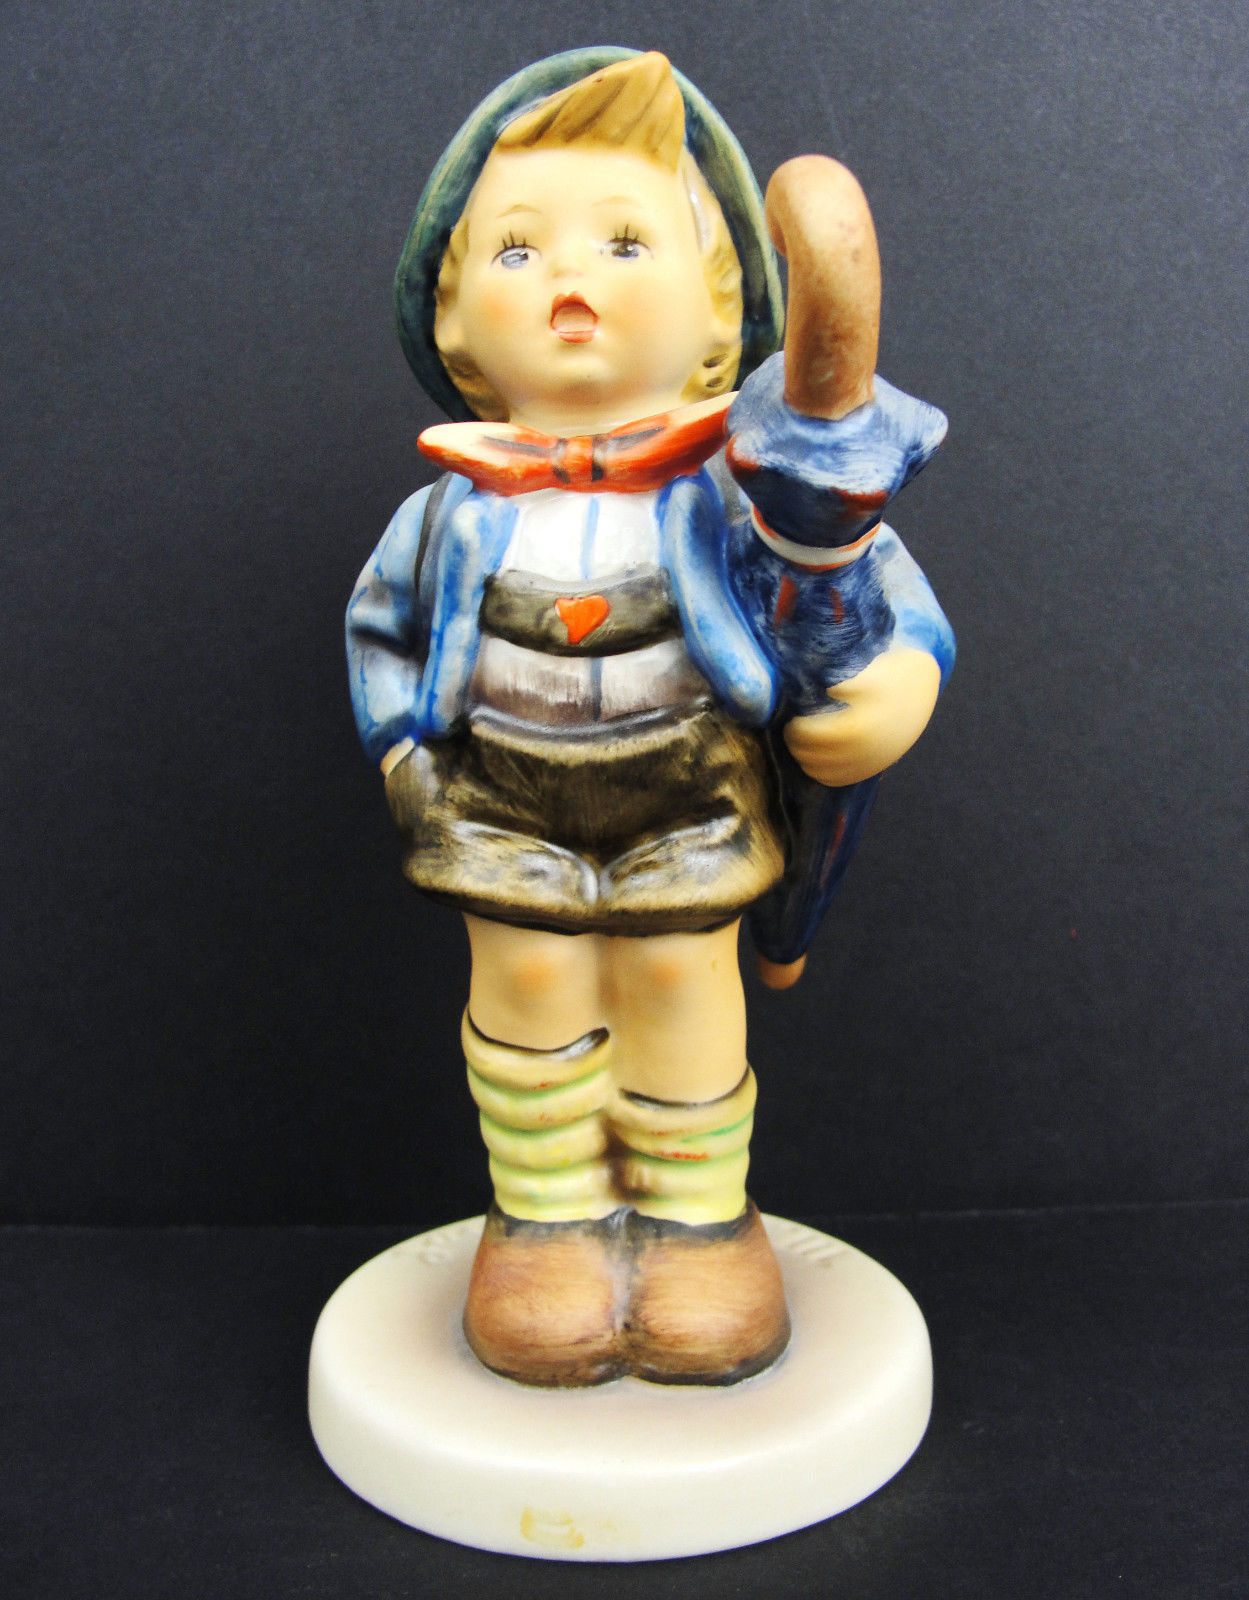 Hummel Figurine "Home From Market" #198 and similar items